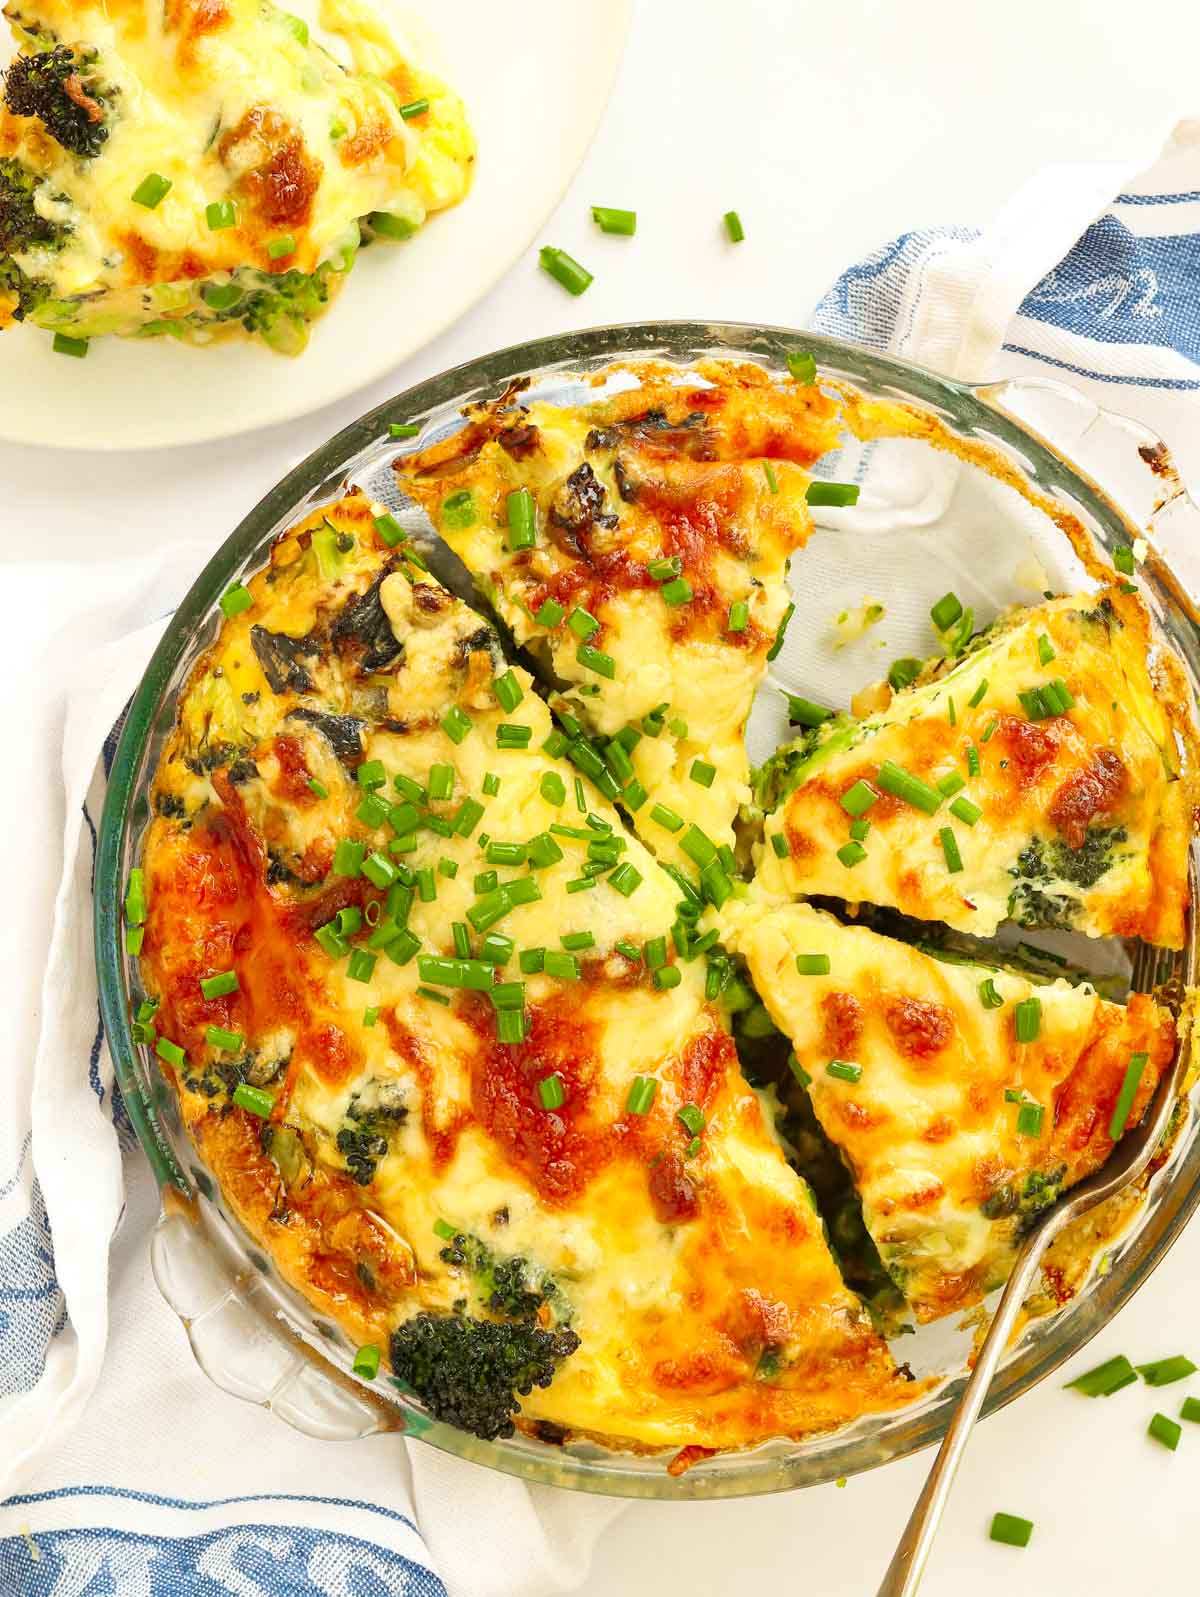 Recipe for Crustless Quiche with vegetables and cheesy filling